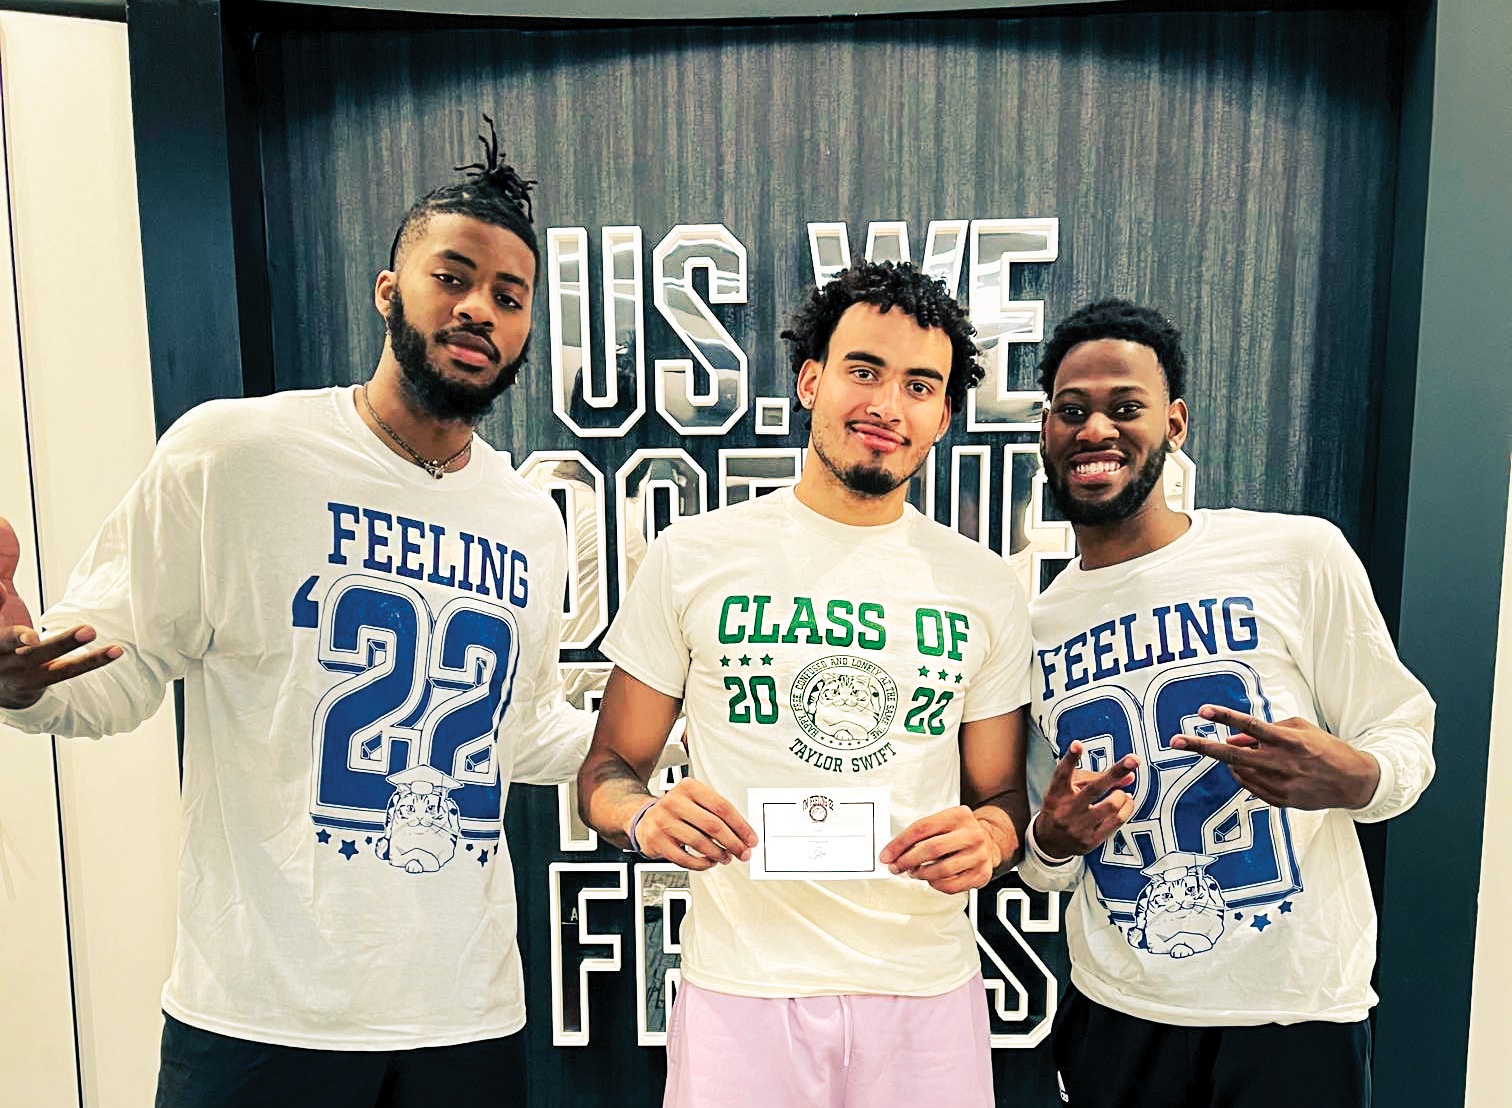 The shirts were modeled at the season ticket holder dinner in June by, from left, Nate Watson ’21, Justin Minaya, and Al Durham. Minaya holds a note from Swift.